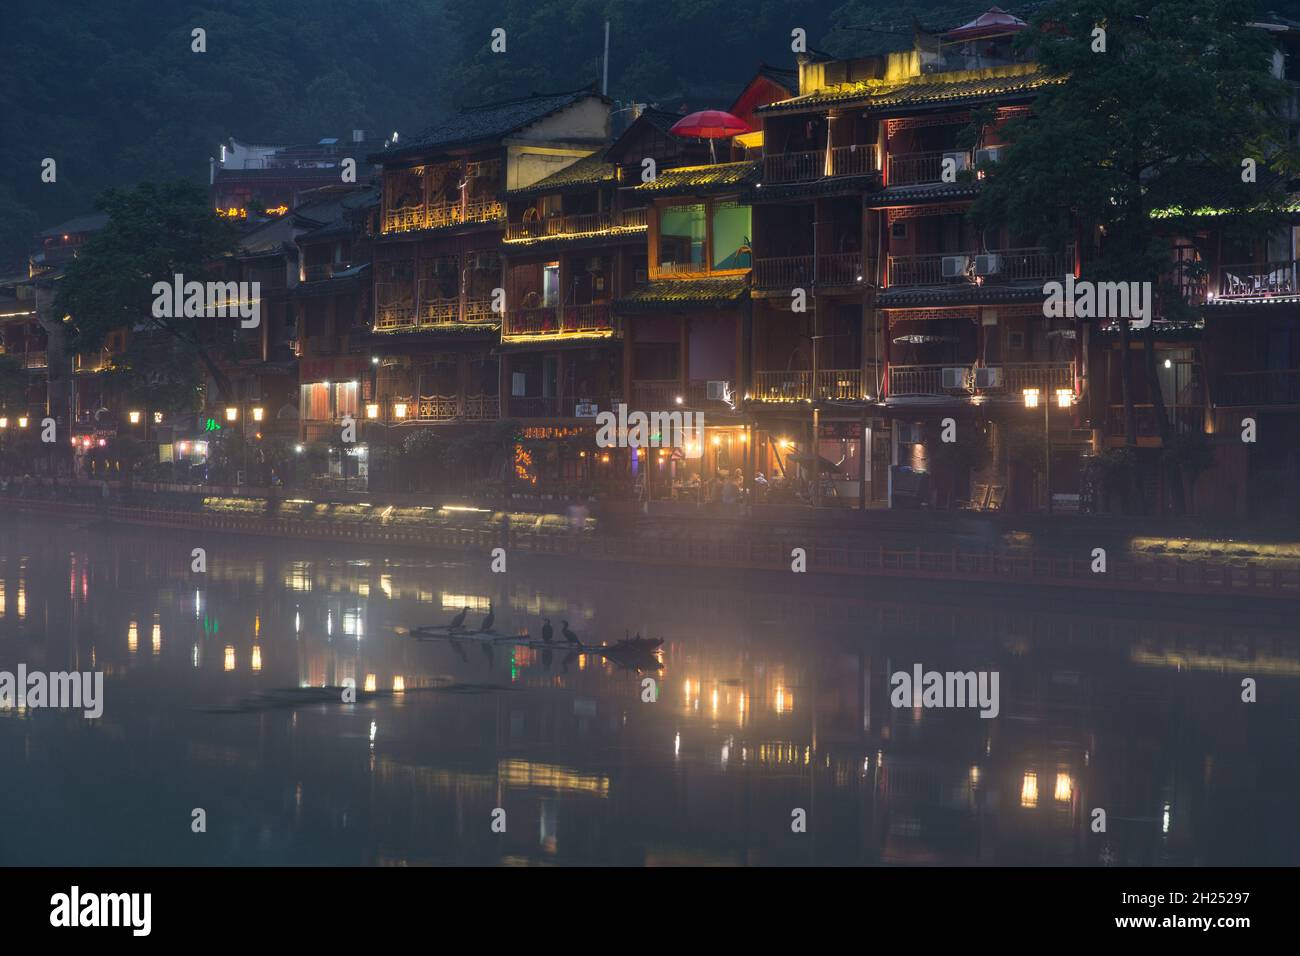 Cormorants on a raft in the Tuojiang River with the city of Fenghuang lit up at night. China. Stock Photo